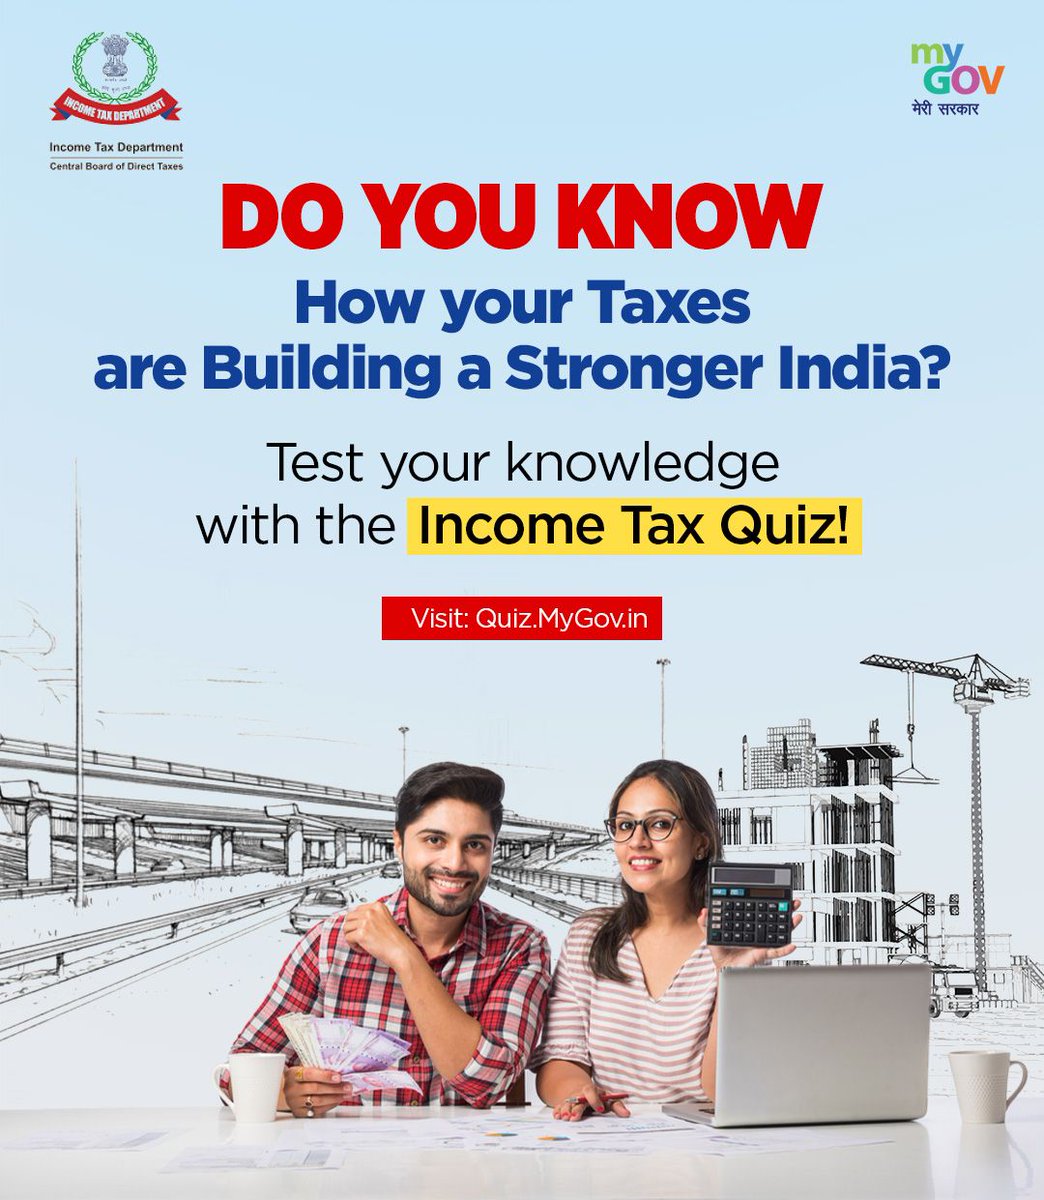 Boost your tax knowledge with the Income Tax Quiz on #MyGov! Stay informed and make smarter tax decisions today. Visit: quiz.mygov.in/quiz/income-ta… #NewIndia #IT @IncomeTaxIndia